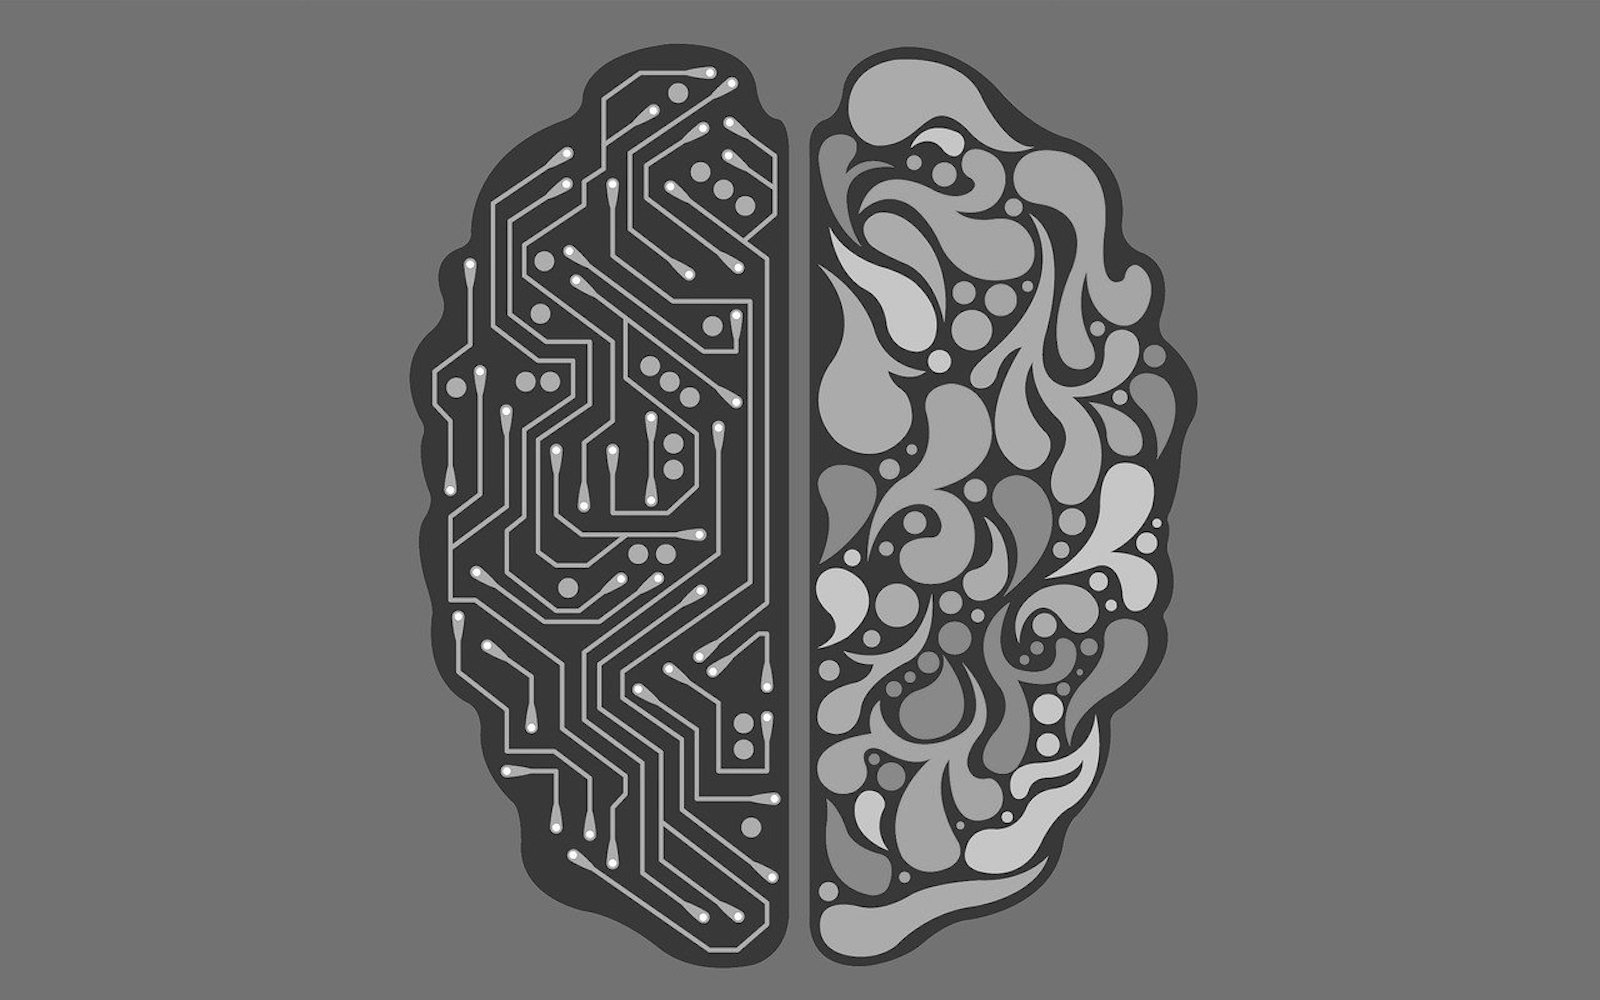 Two halves of a brain -- one showing a typical brain and the other showing artificial intelligence -- all against a grey background